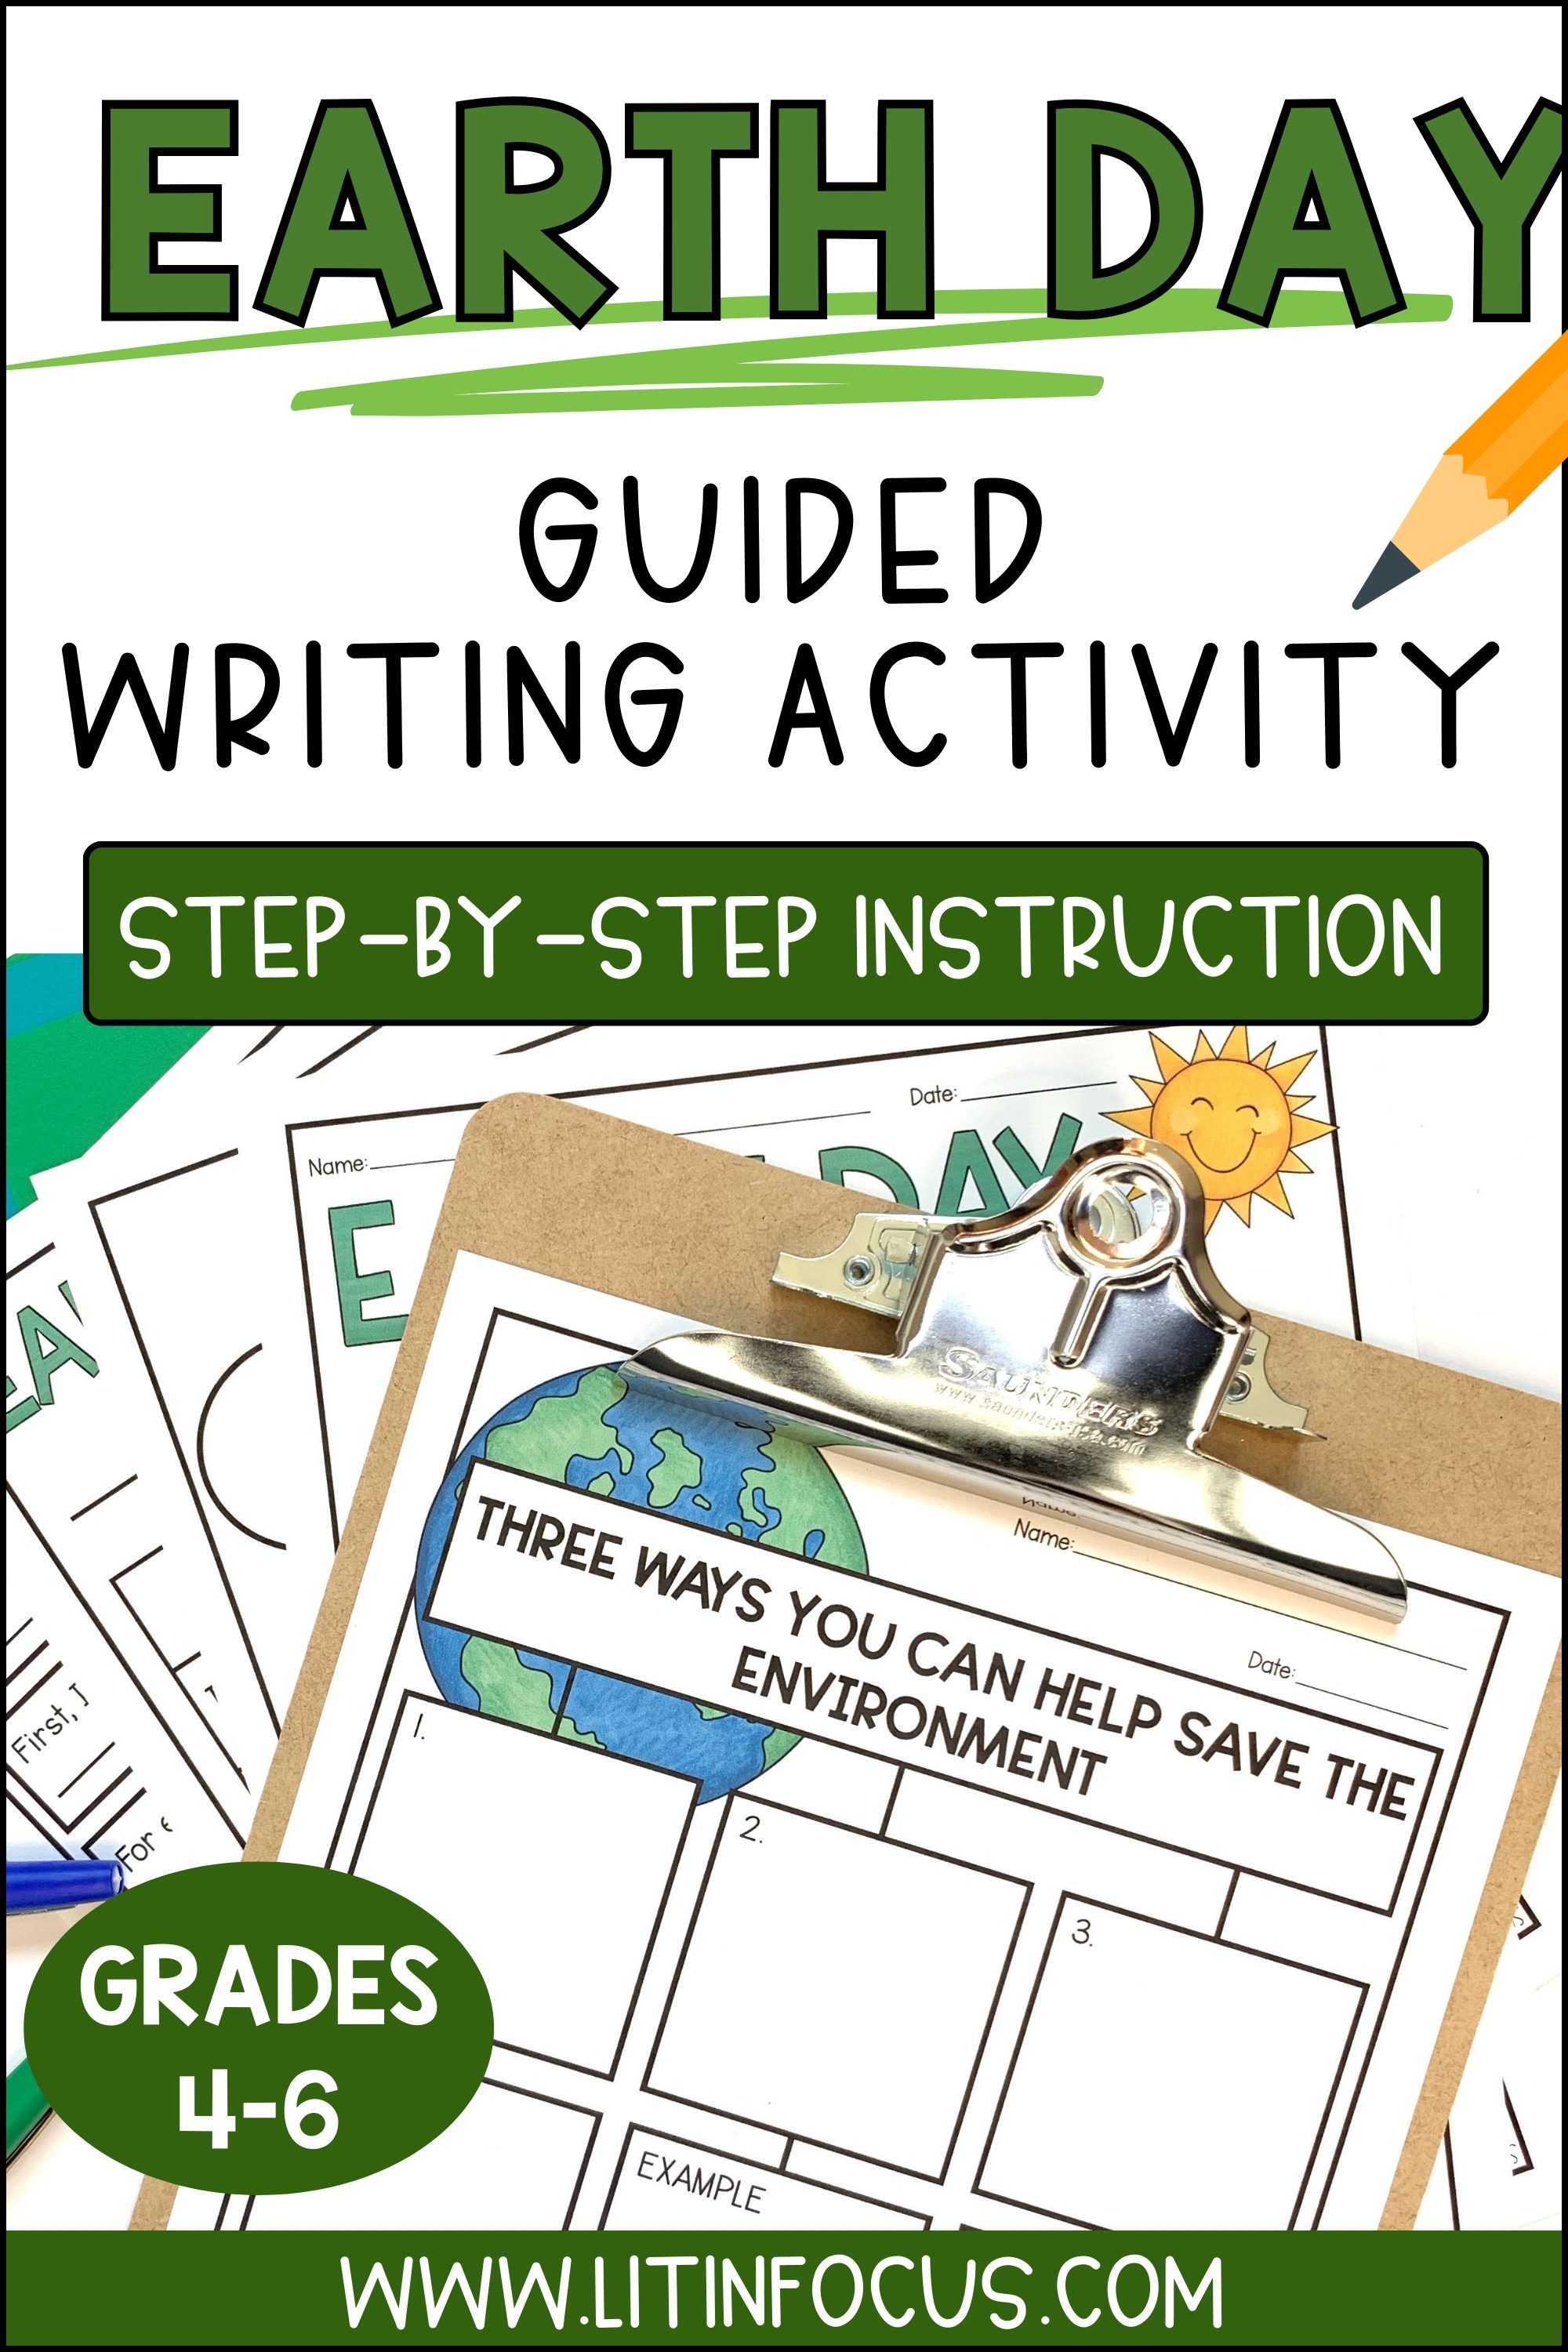 Earth Day Writing Activity for Kids